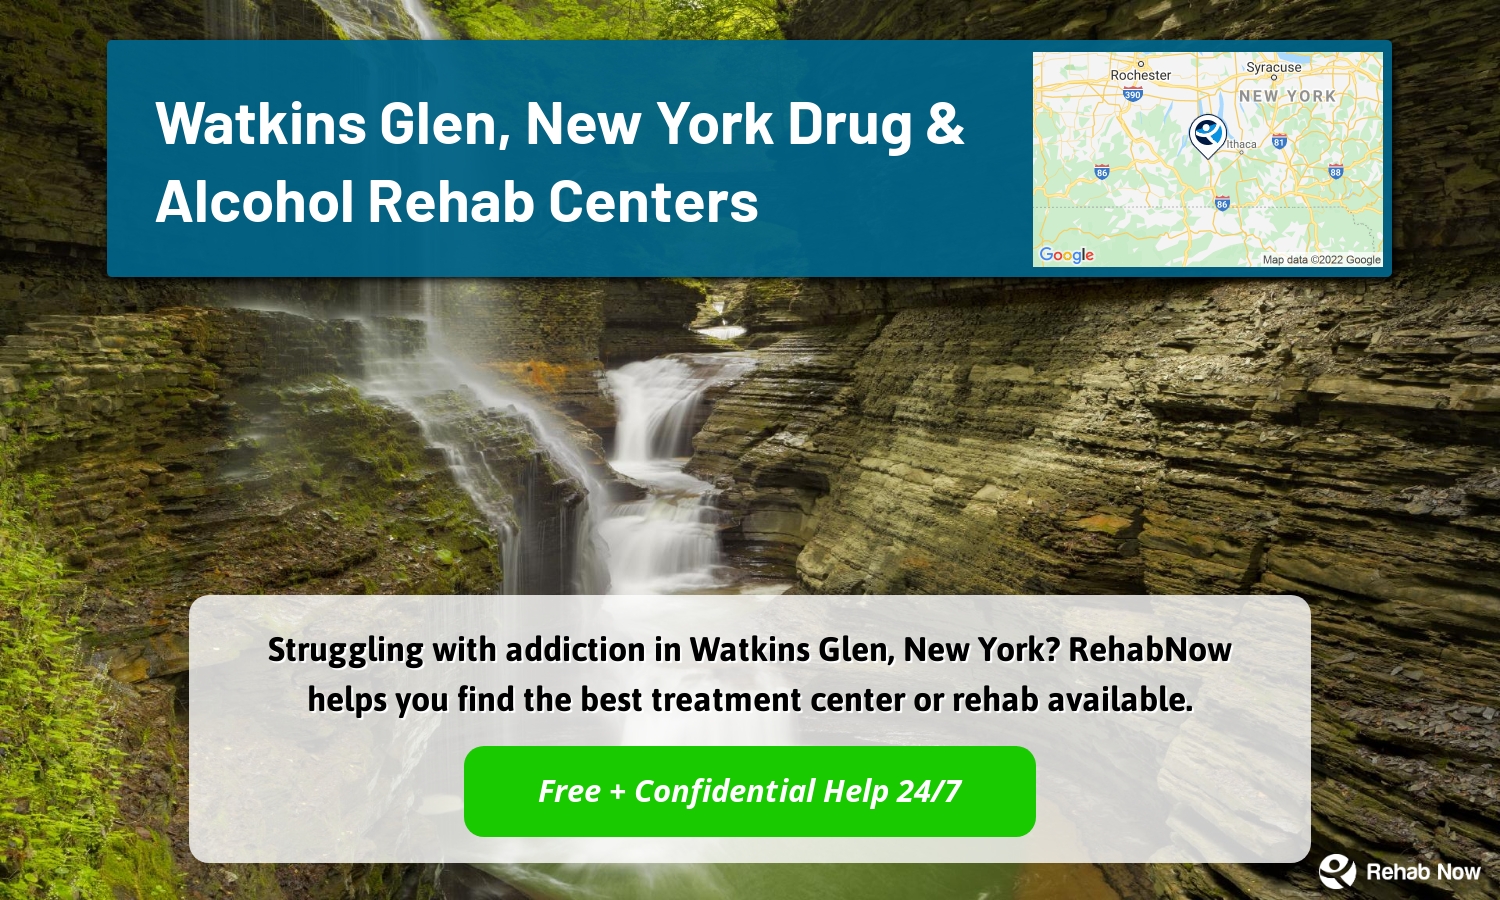 Struggling with addiction in Watkins Glen, New York? RehabNow helps you find the best treatment center or rehab available.